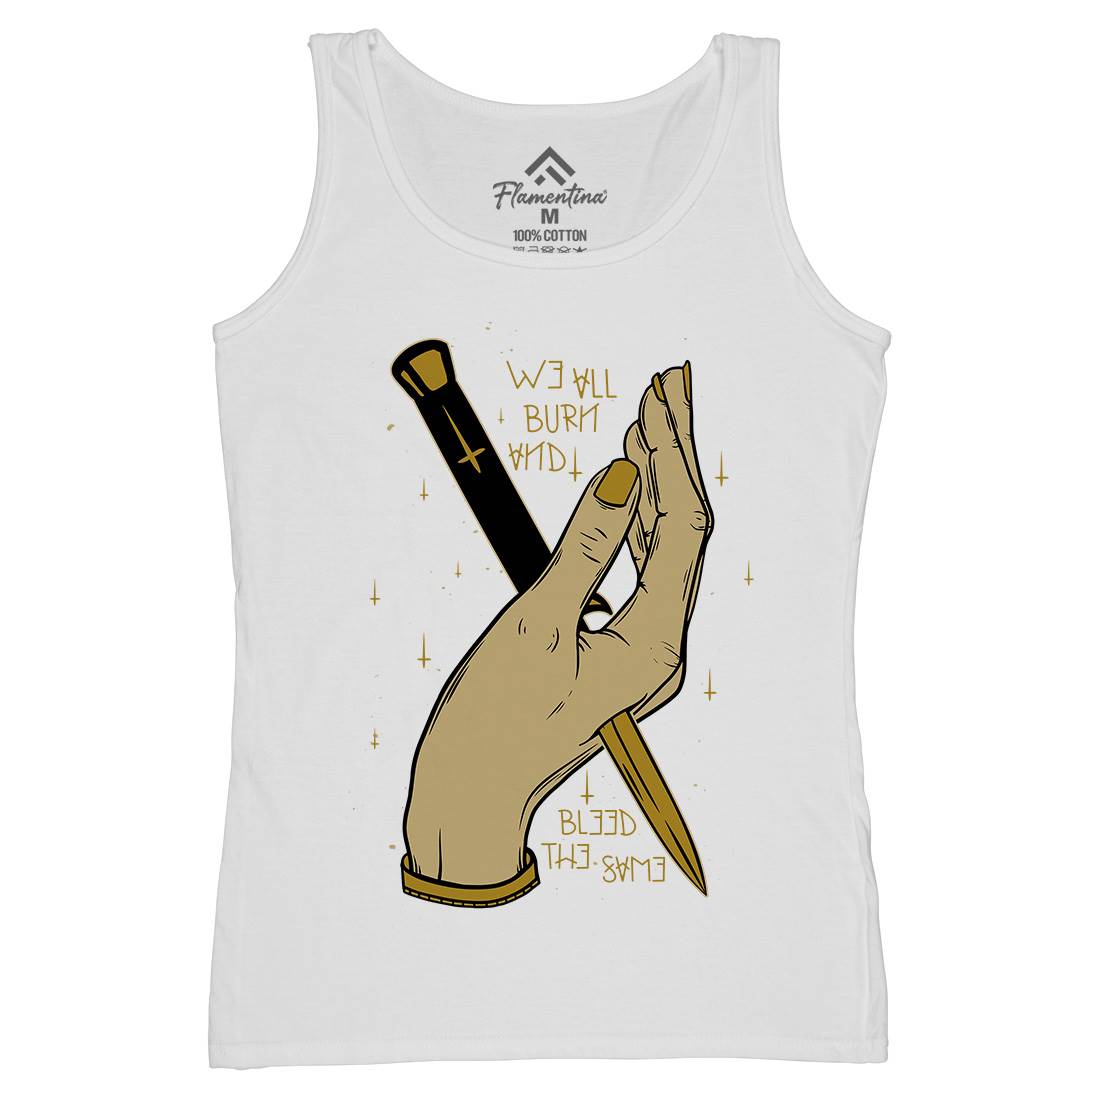 We Are The Same Womens Organic Tank Top Vest Quotes D495